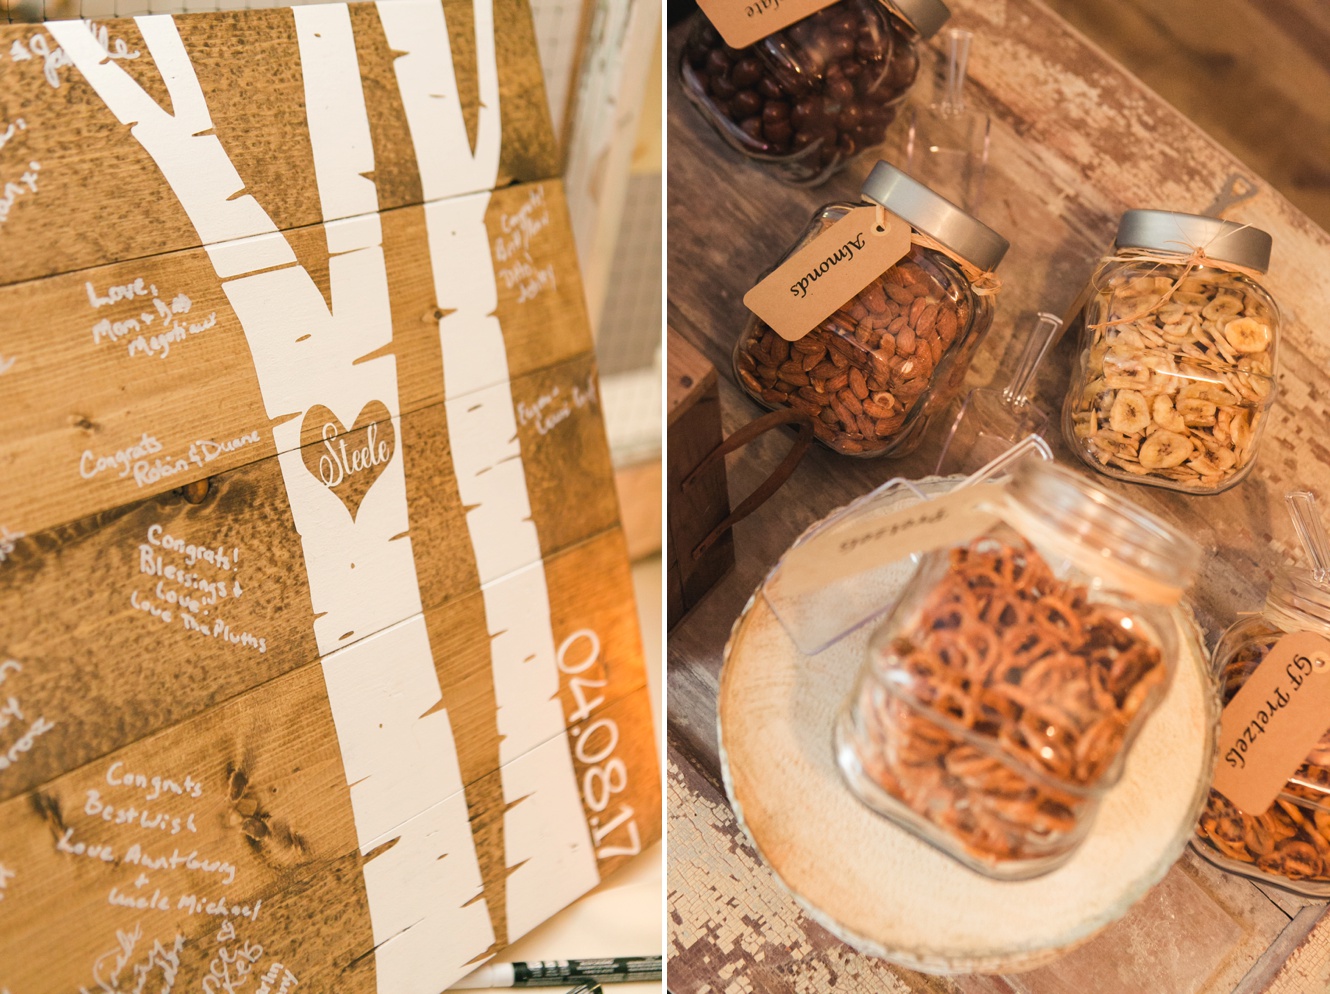 Trail mix bar inspiration for your wedding photo